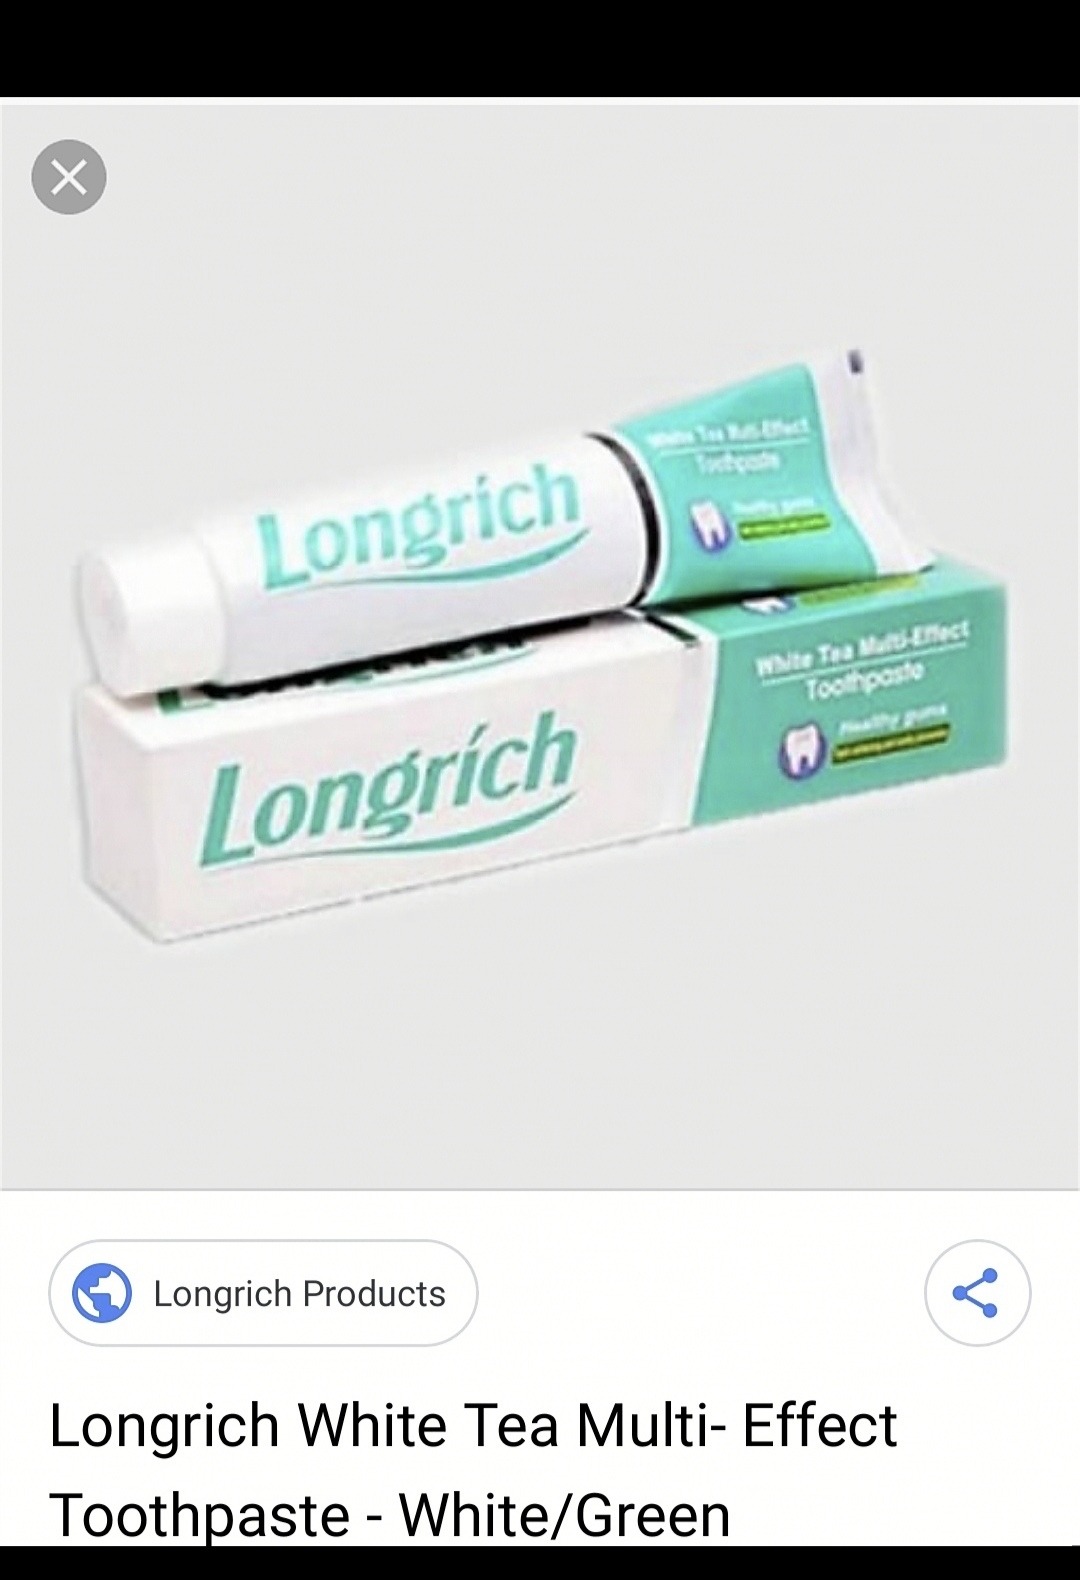 Longrich toothpaste